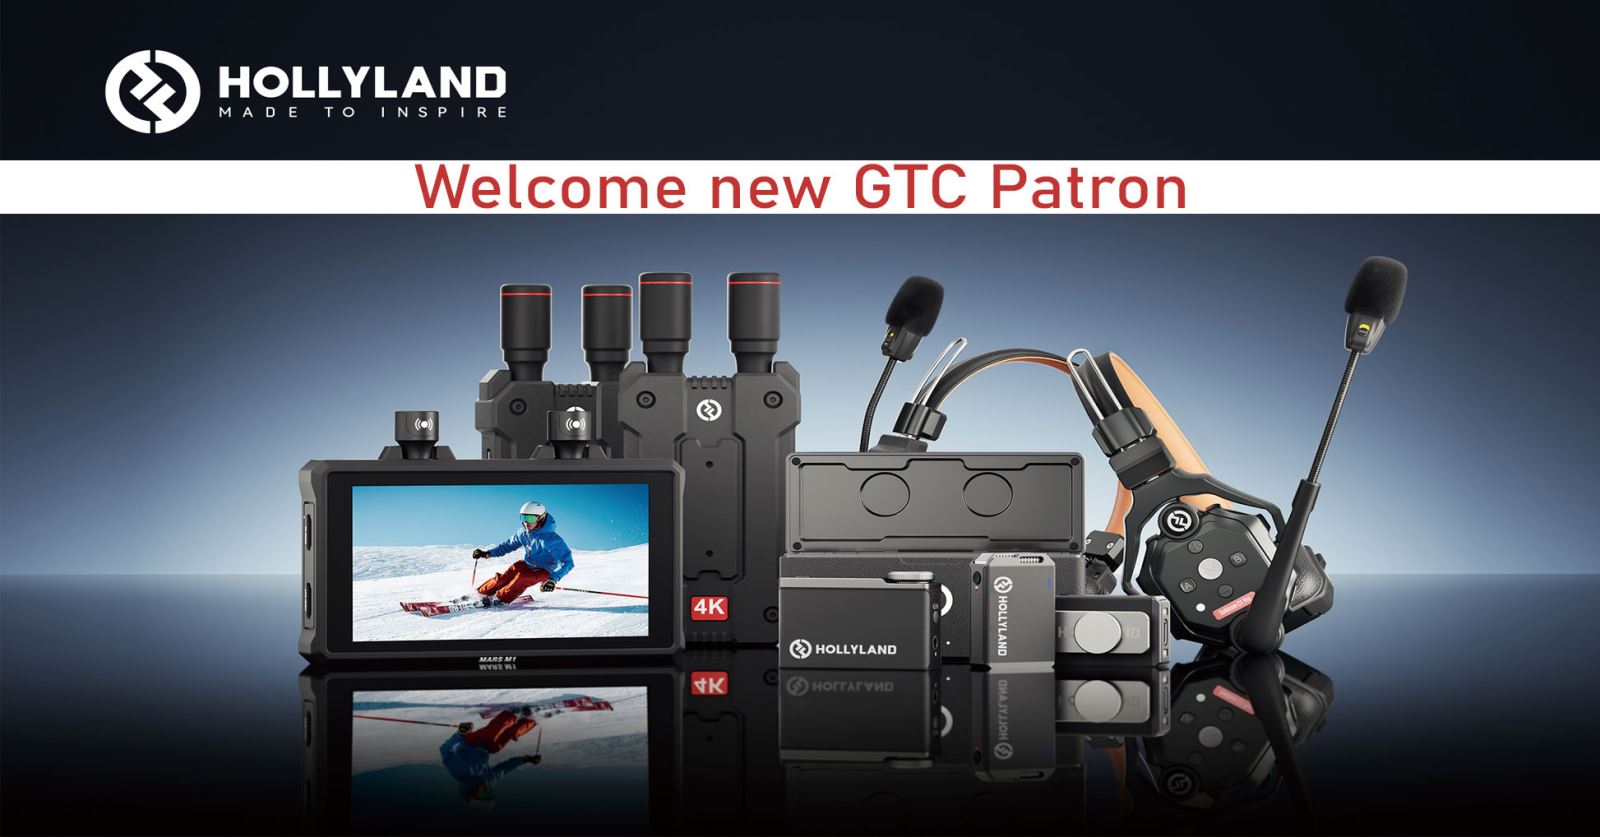 Welcome new GTC Patron, Hollyland